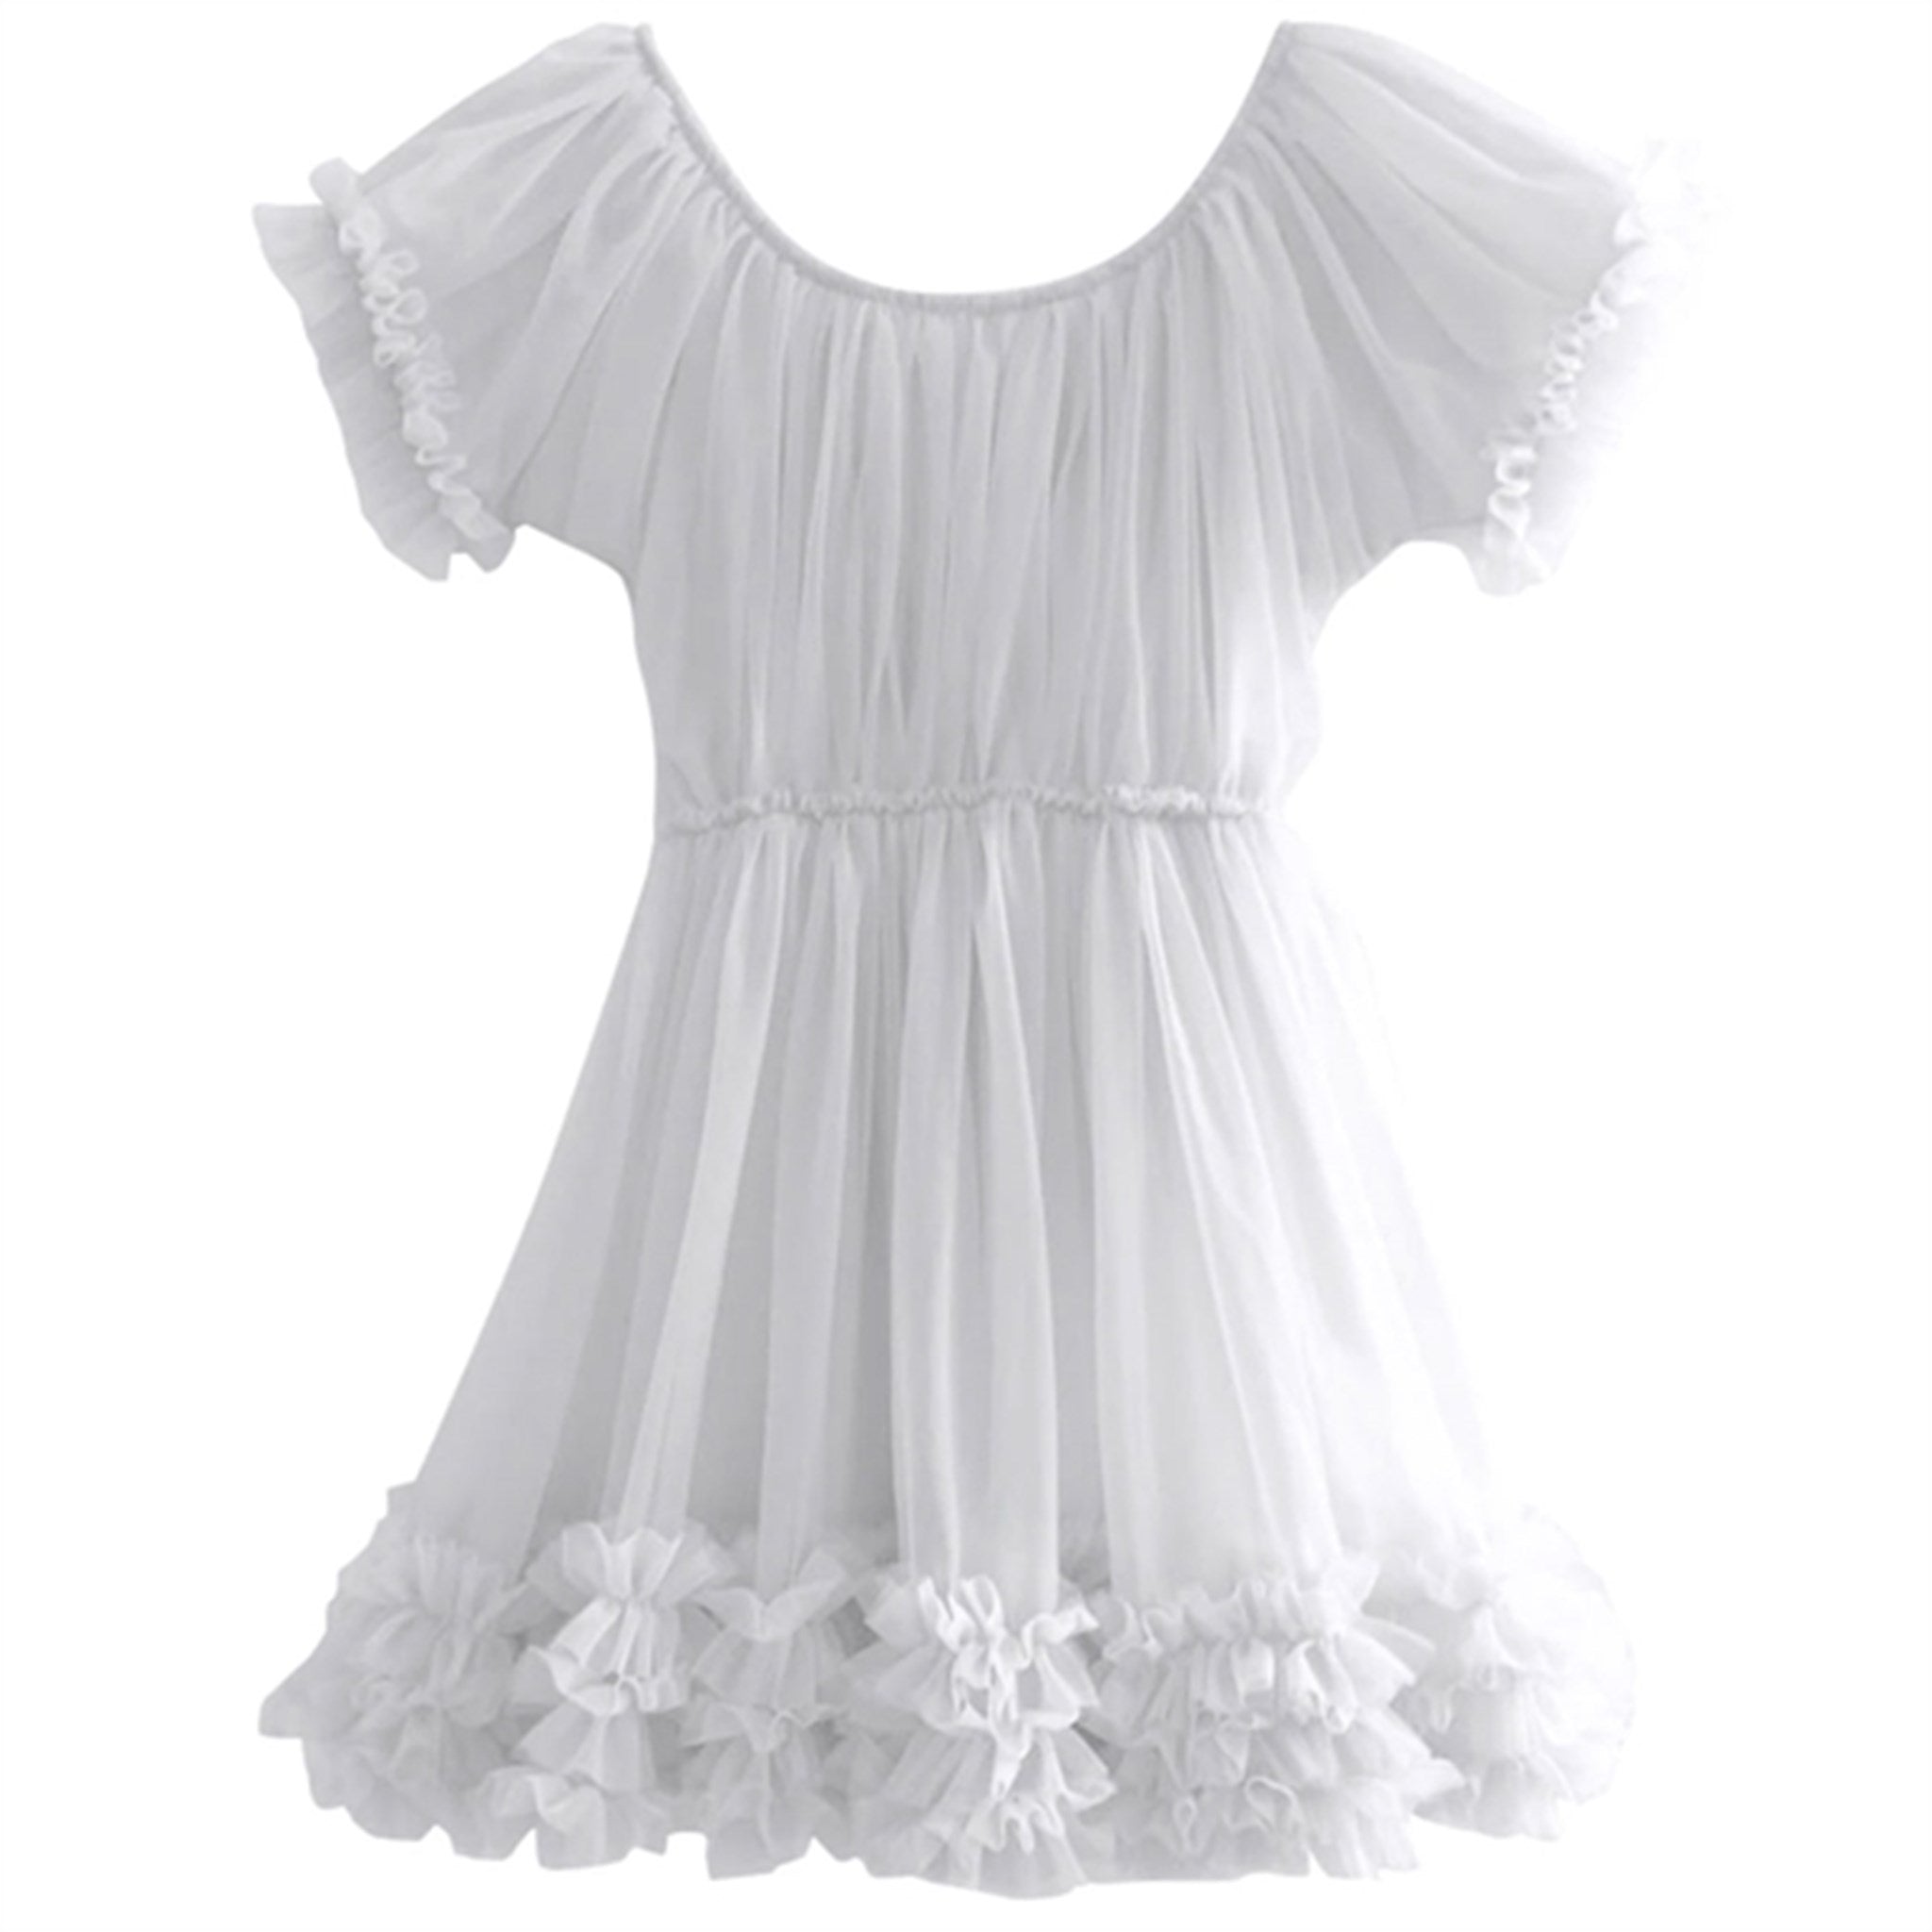 Dolly by Le Petit Frilly Klänning Offwhite